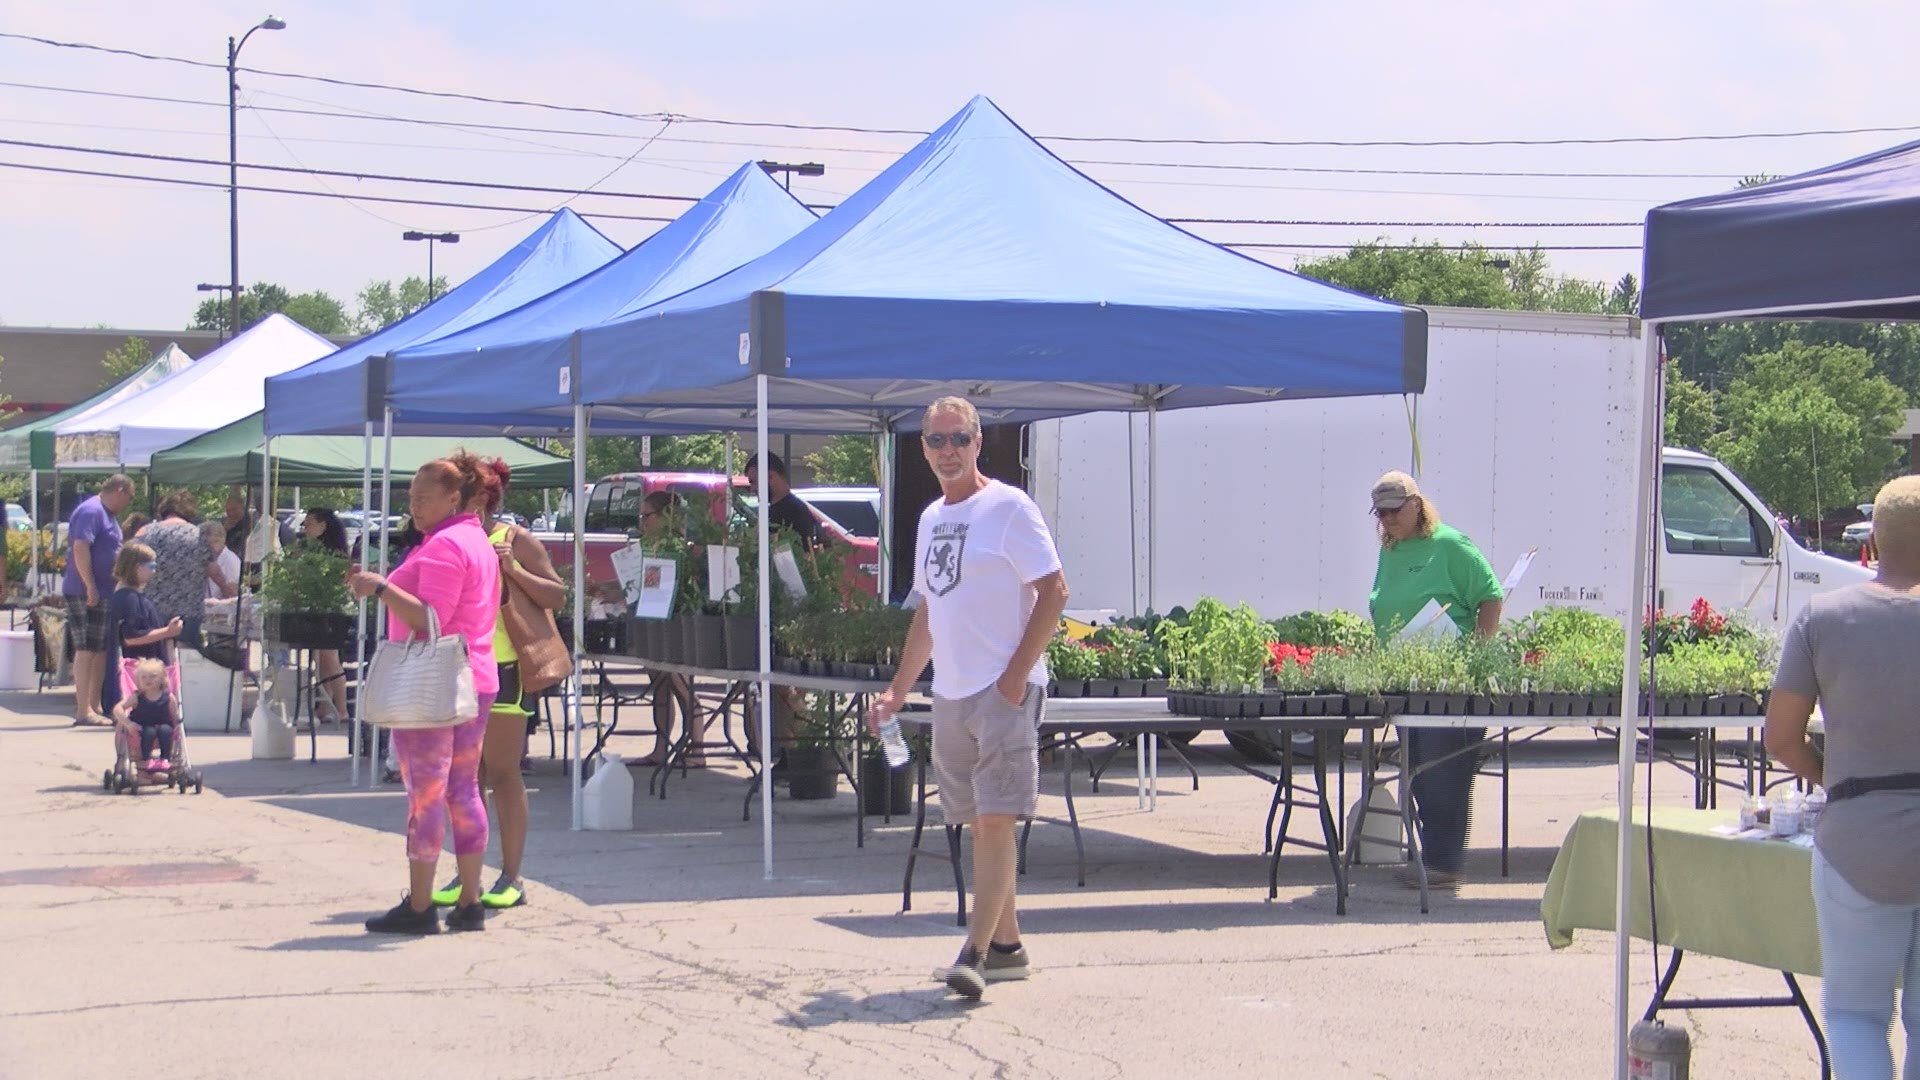 It's summertime, when you'd probably expect kids to be at camp or at the pool, but 12-year-old Mallory Kolin spends her free time making money. She works at her grandfather's produce stand twice a week.